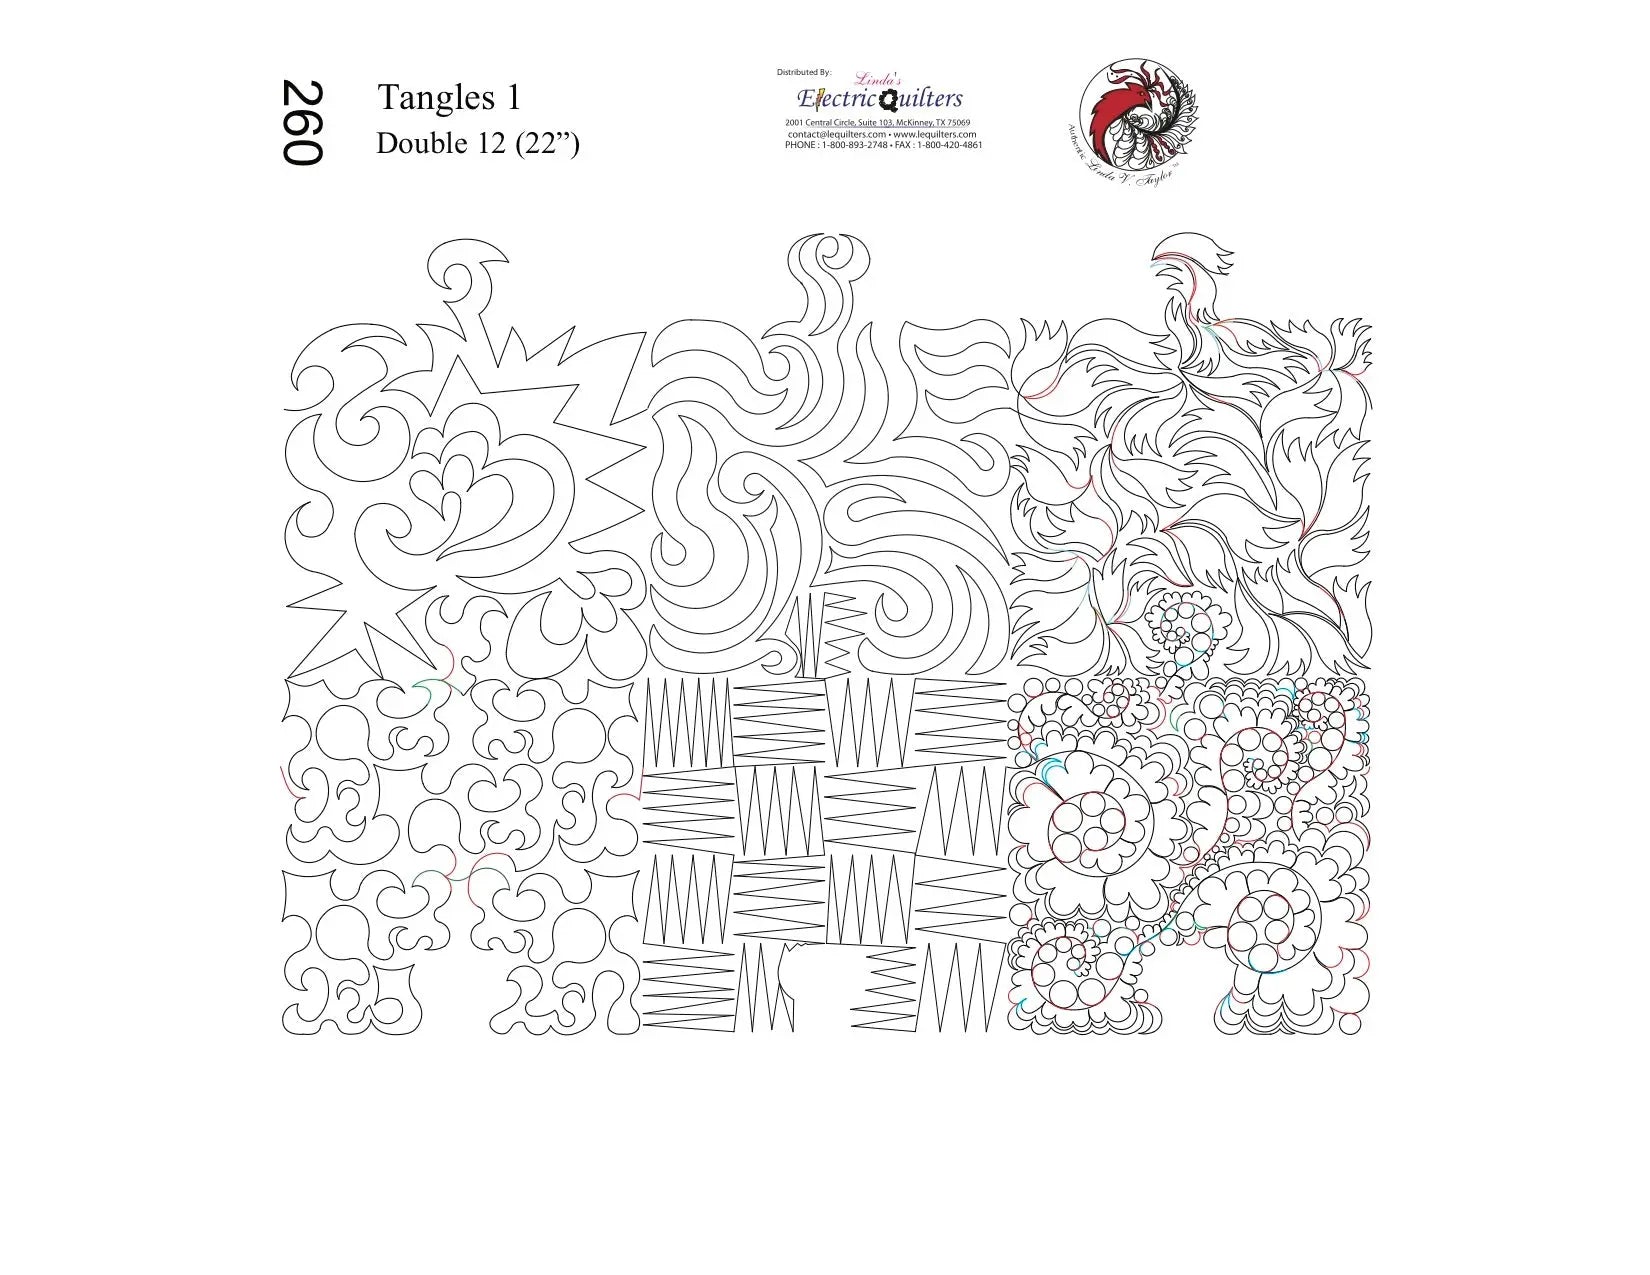 260 Tangles 1 Pantograph by Linda V. Taylor - Linda's Electric Quilters